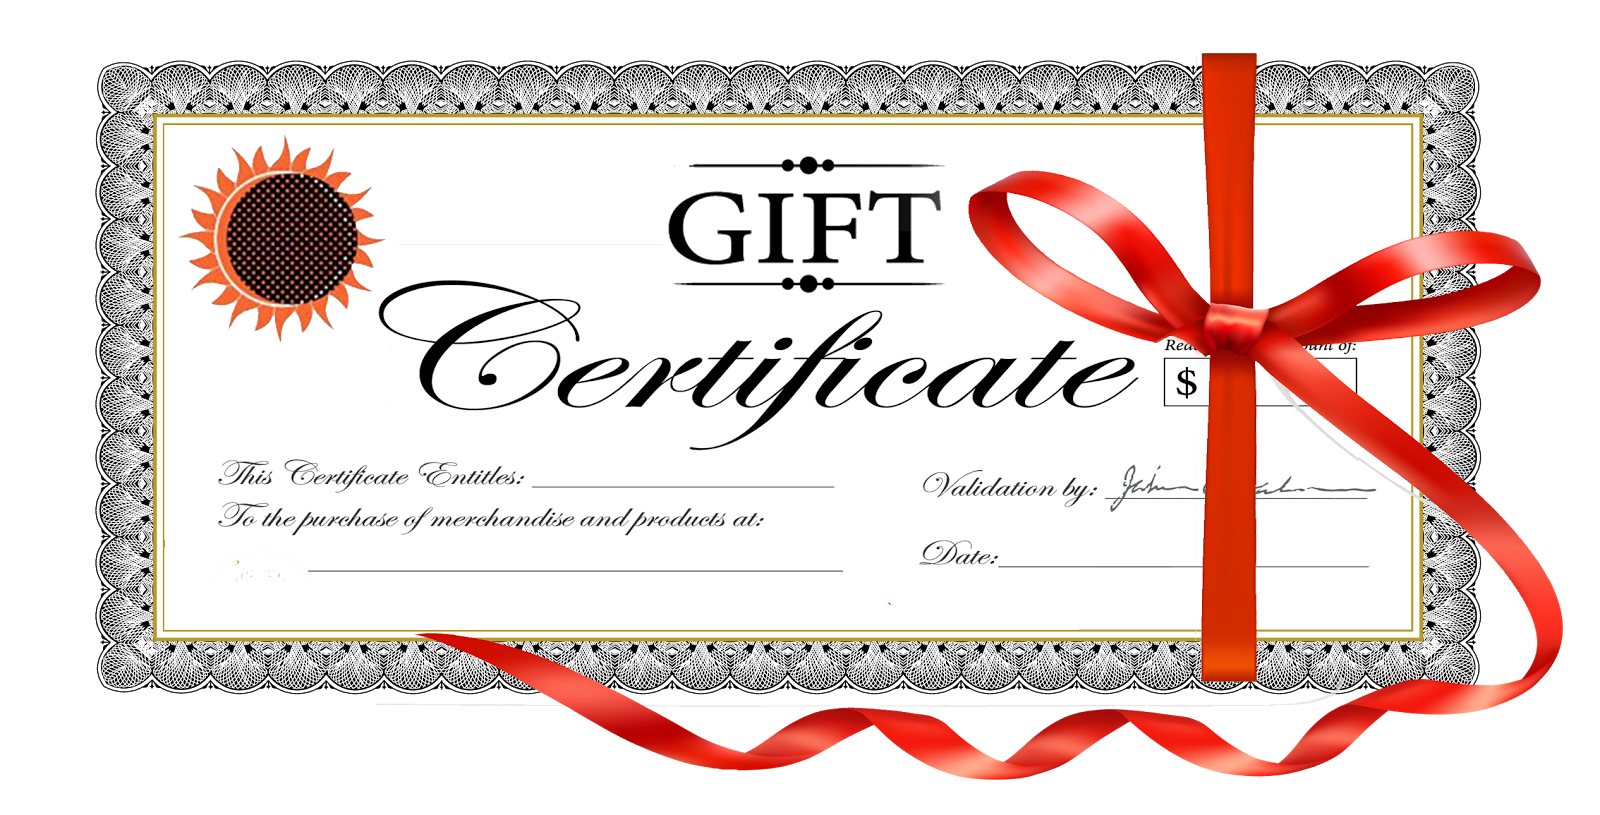 Gift Certificate 50 00